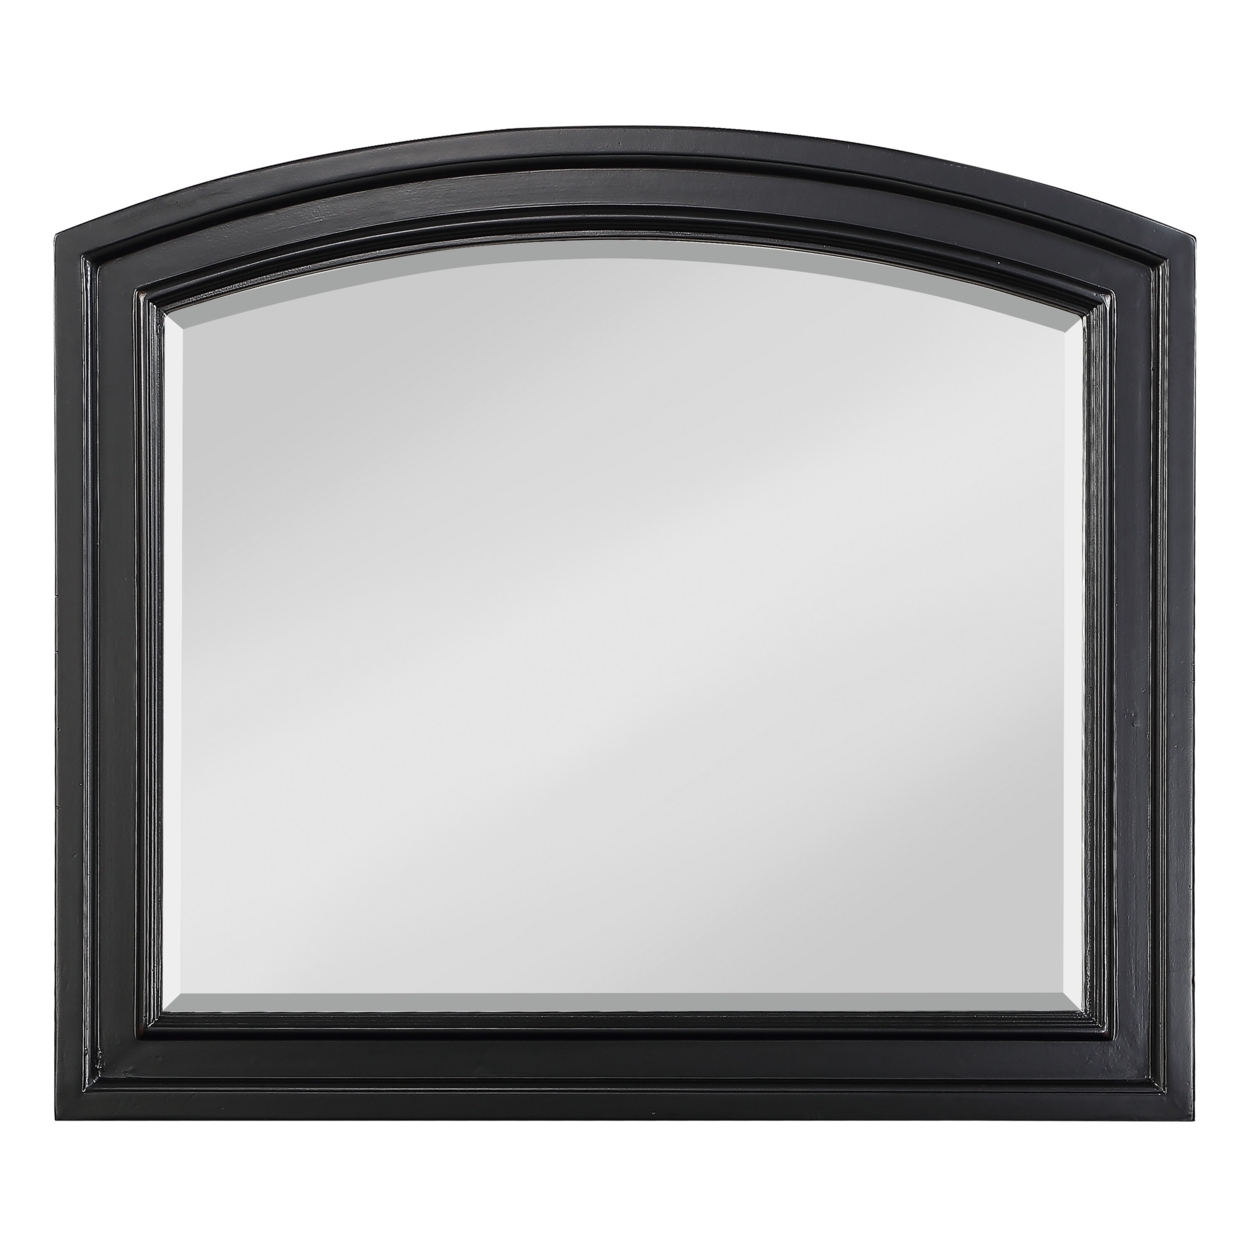 Wooden Mirror With Raised Edges And Curved Top, Black- Saltoro Sherpi